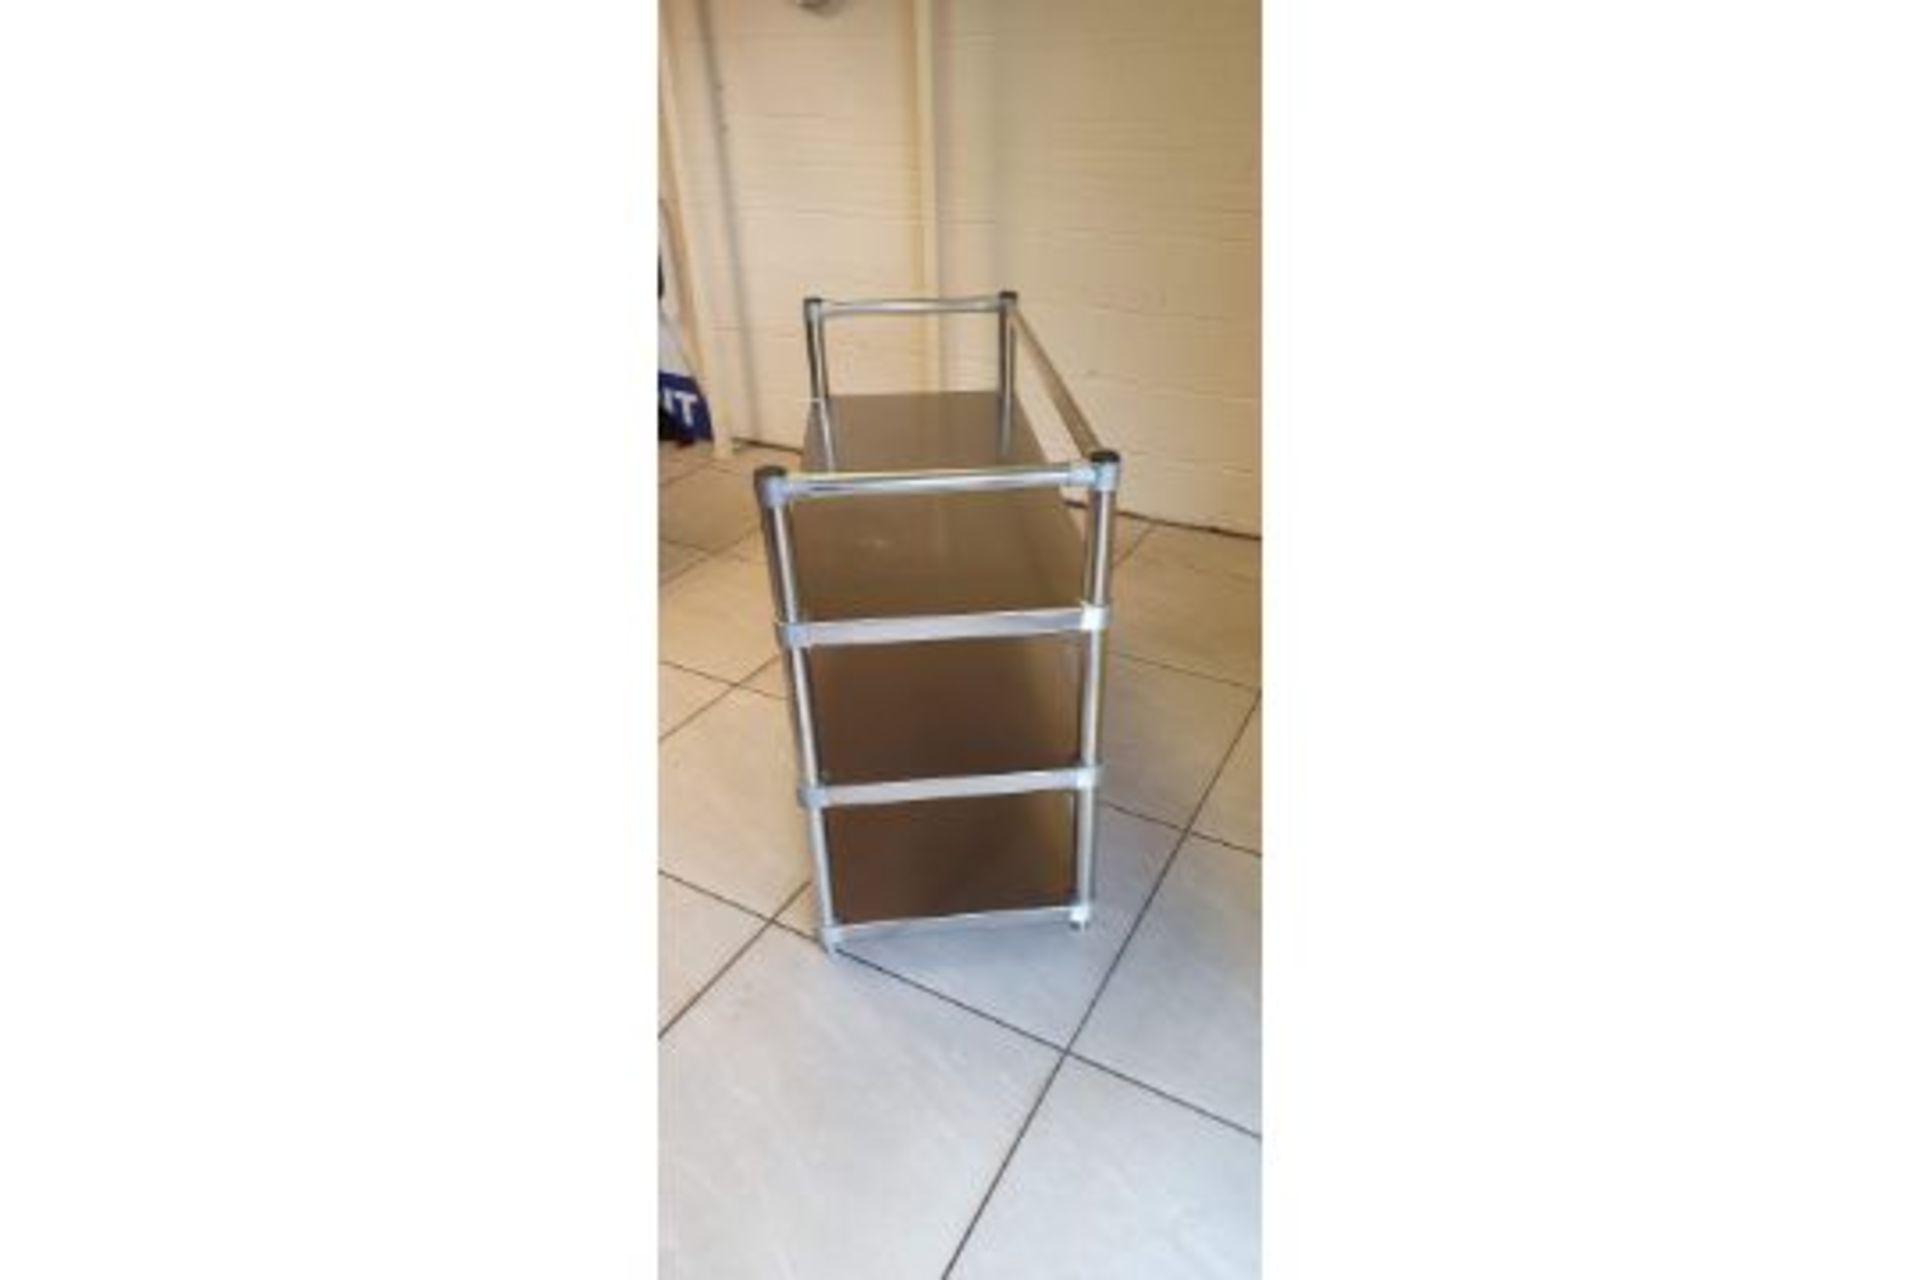 Stainless Steel storage rack / stand - Image 3 of 3